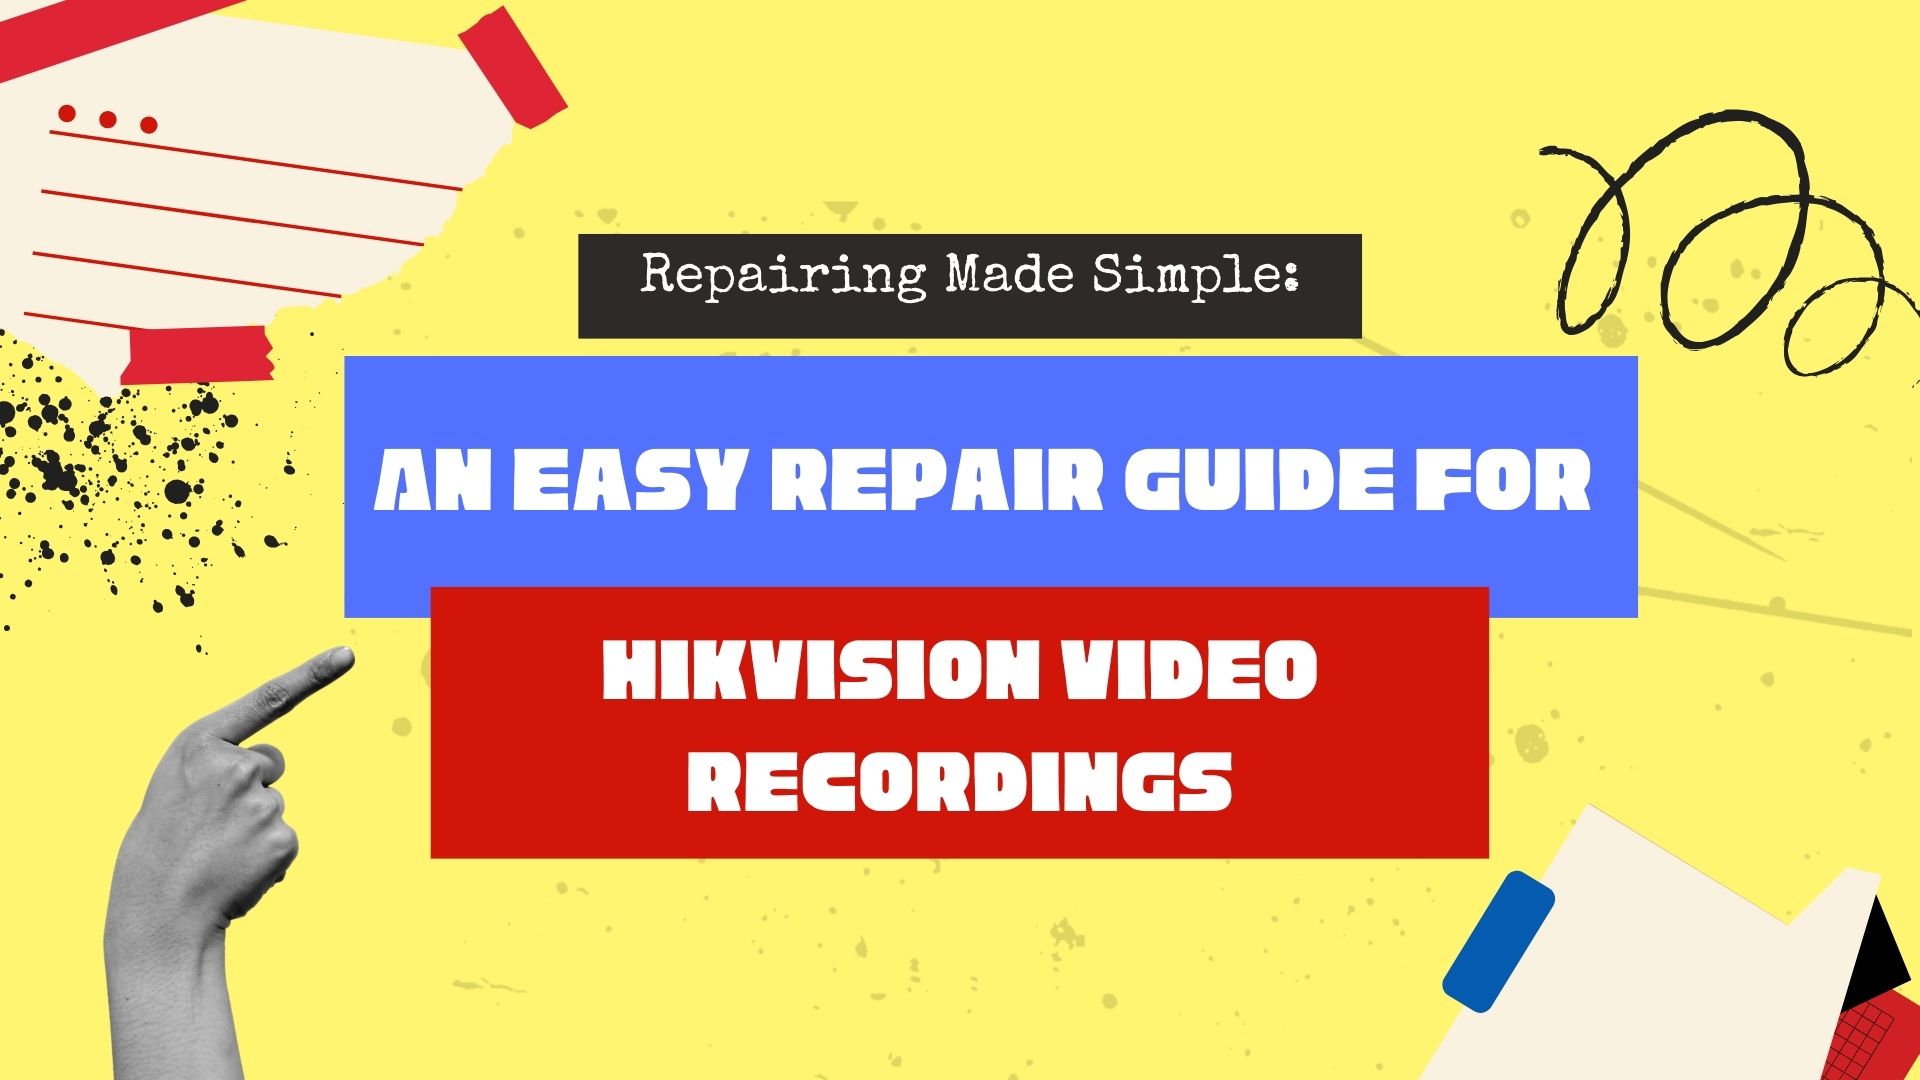 Step-by-Step Guide to Fixing Damaged Hikvision Video Recordings